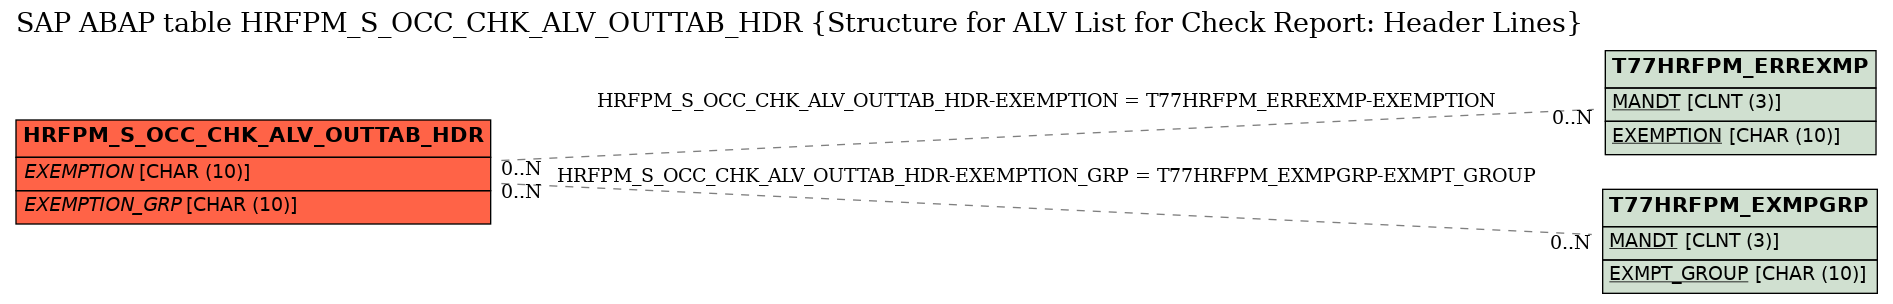 E-R Diagram for table HRFPM_S_OCC_CHK_ALV_OUTTAB_HDR (Structure for ALV List for Check Report: Header Lines)